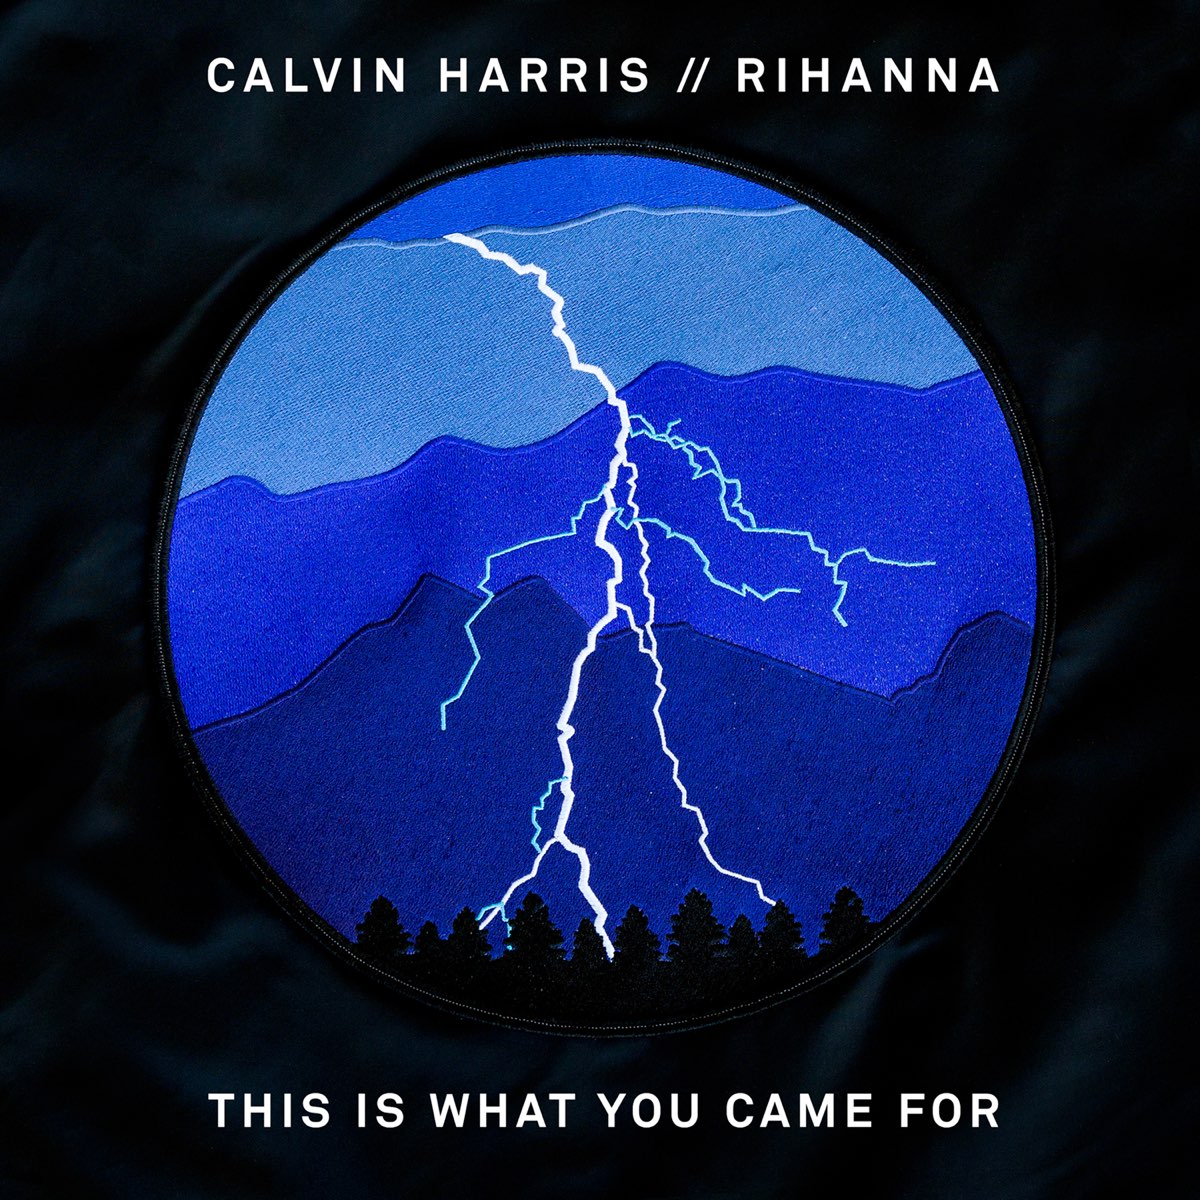 This Is What You Came For Single》 Calvin Harris & Rihanna的专辑 Apple